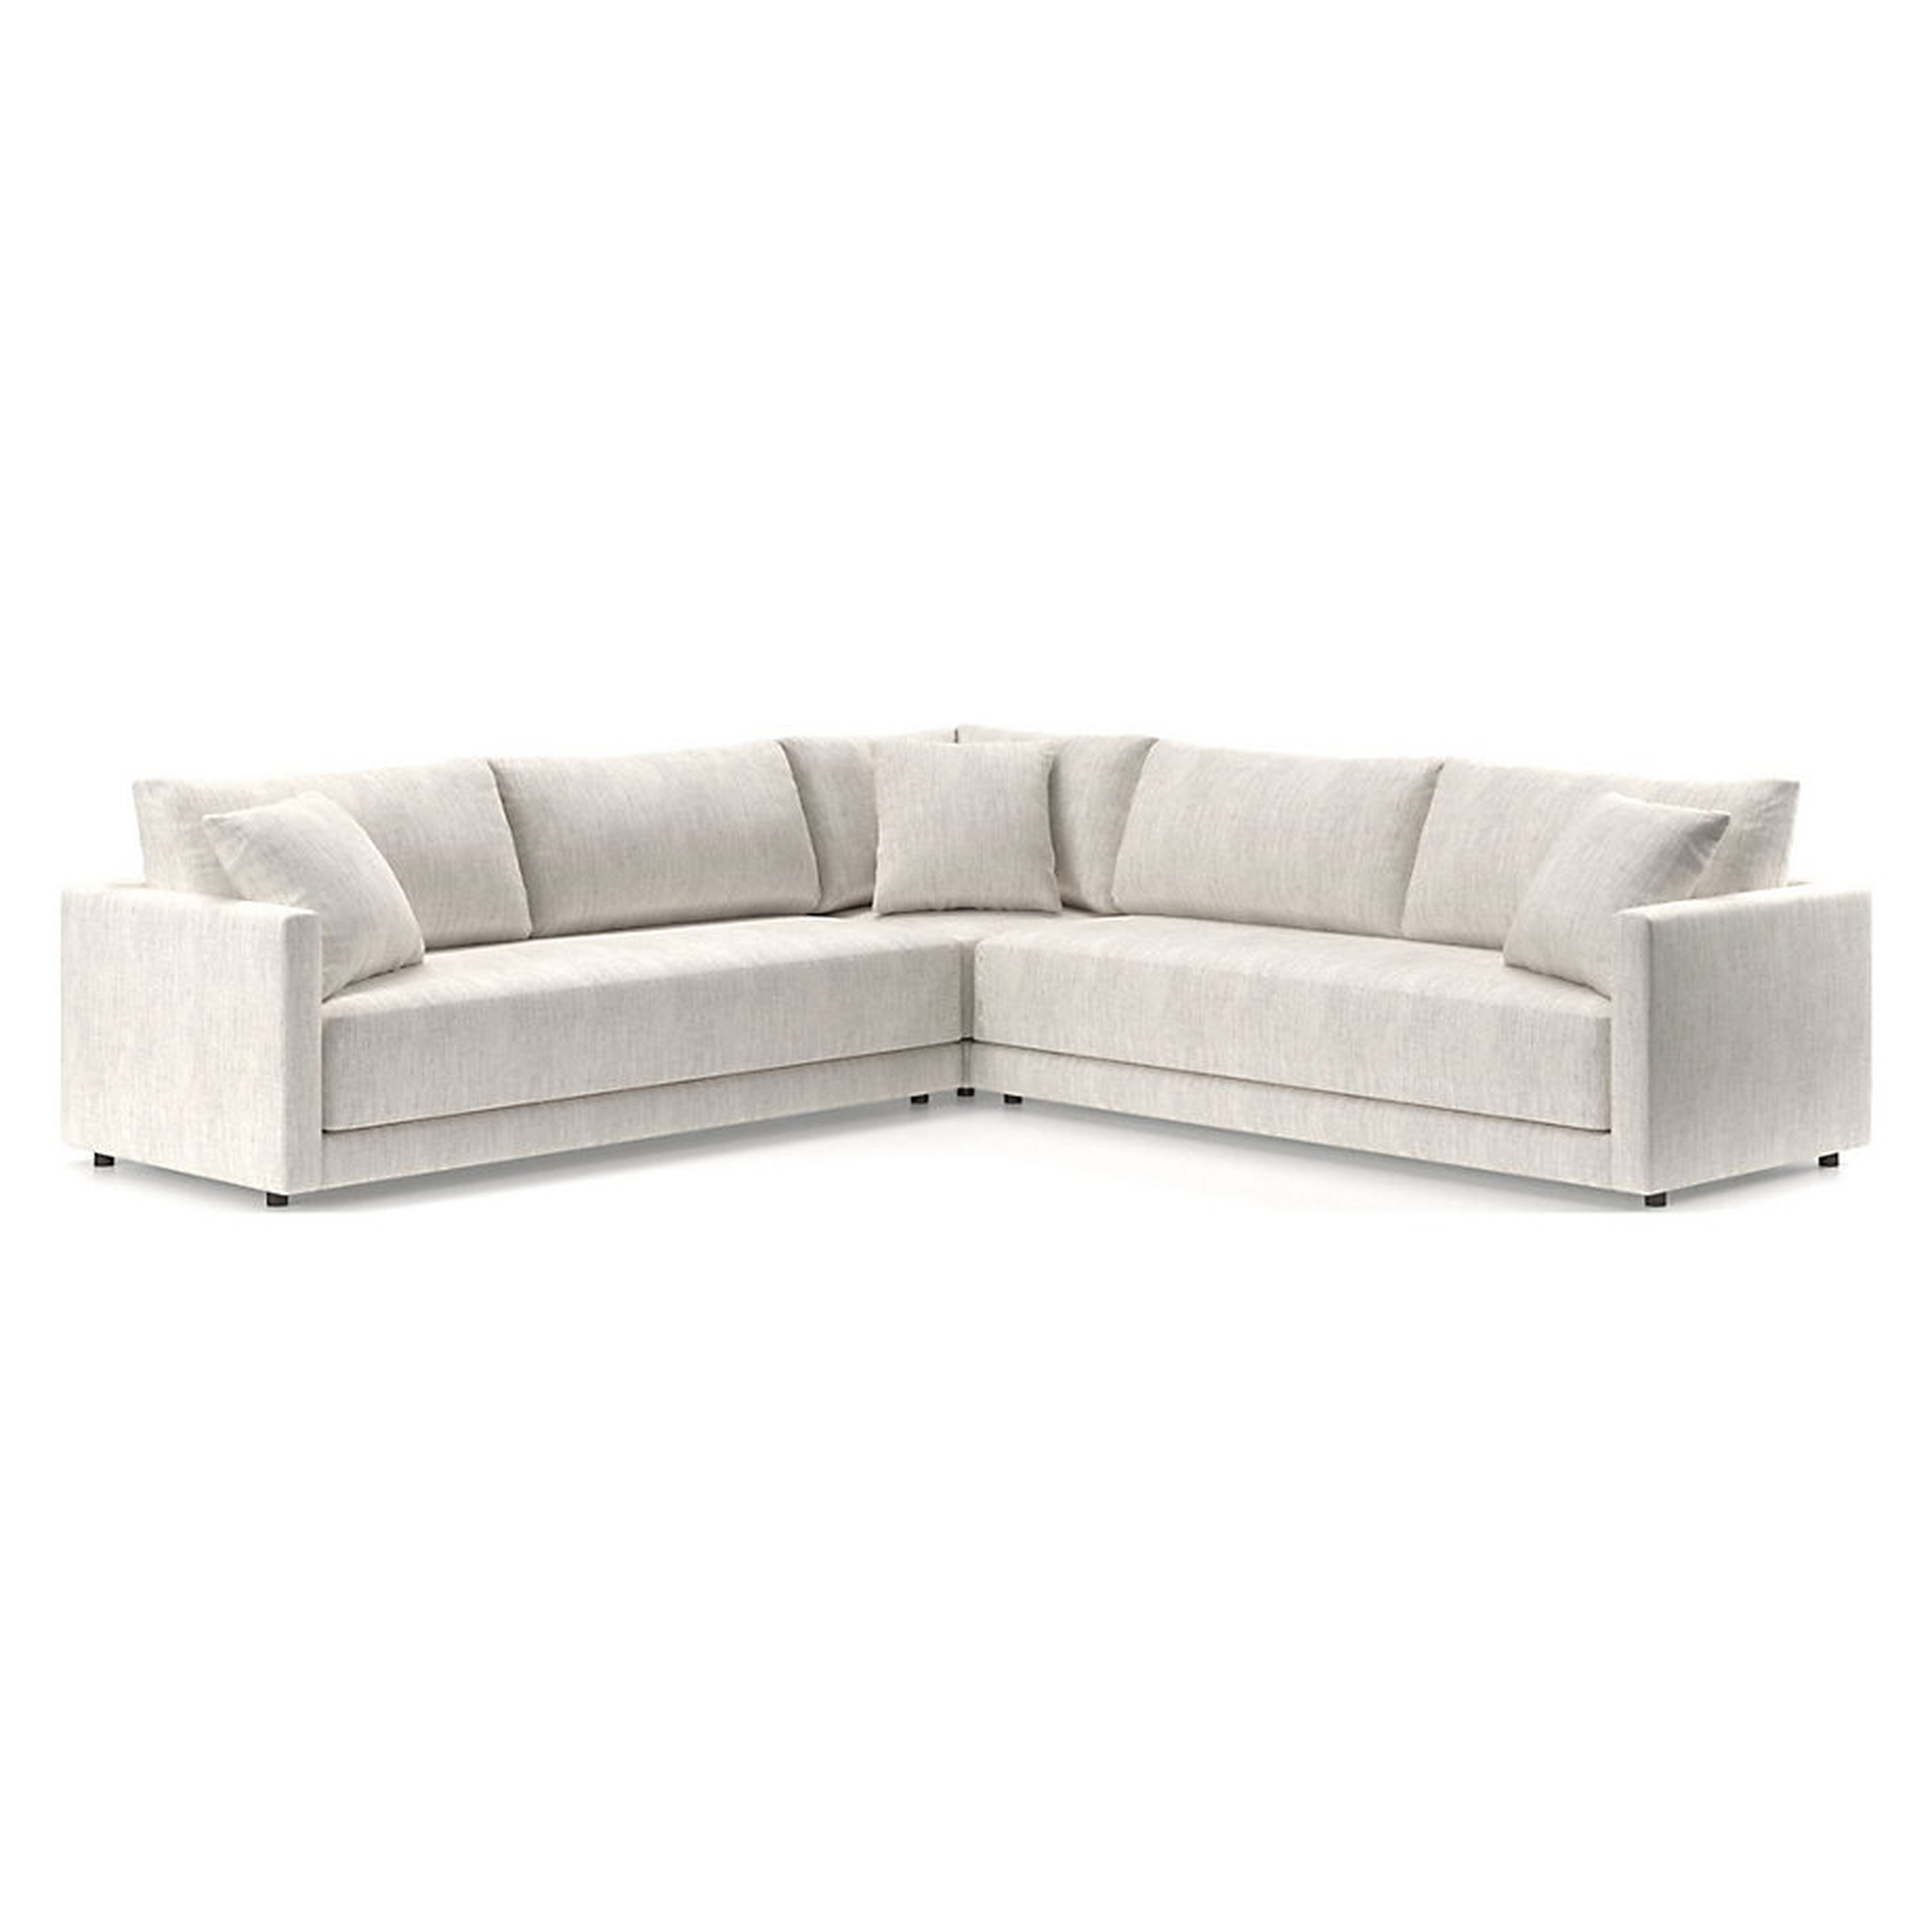 Gather 3-Piece L-Shaped Bench Sectional Sofa - Crate and Barrel